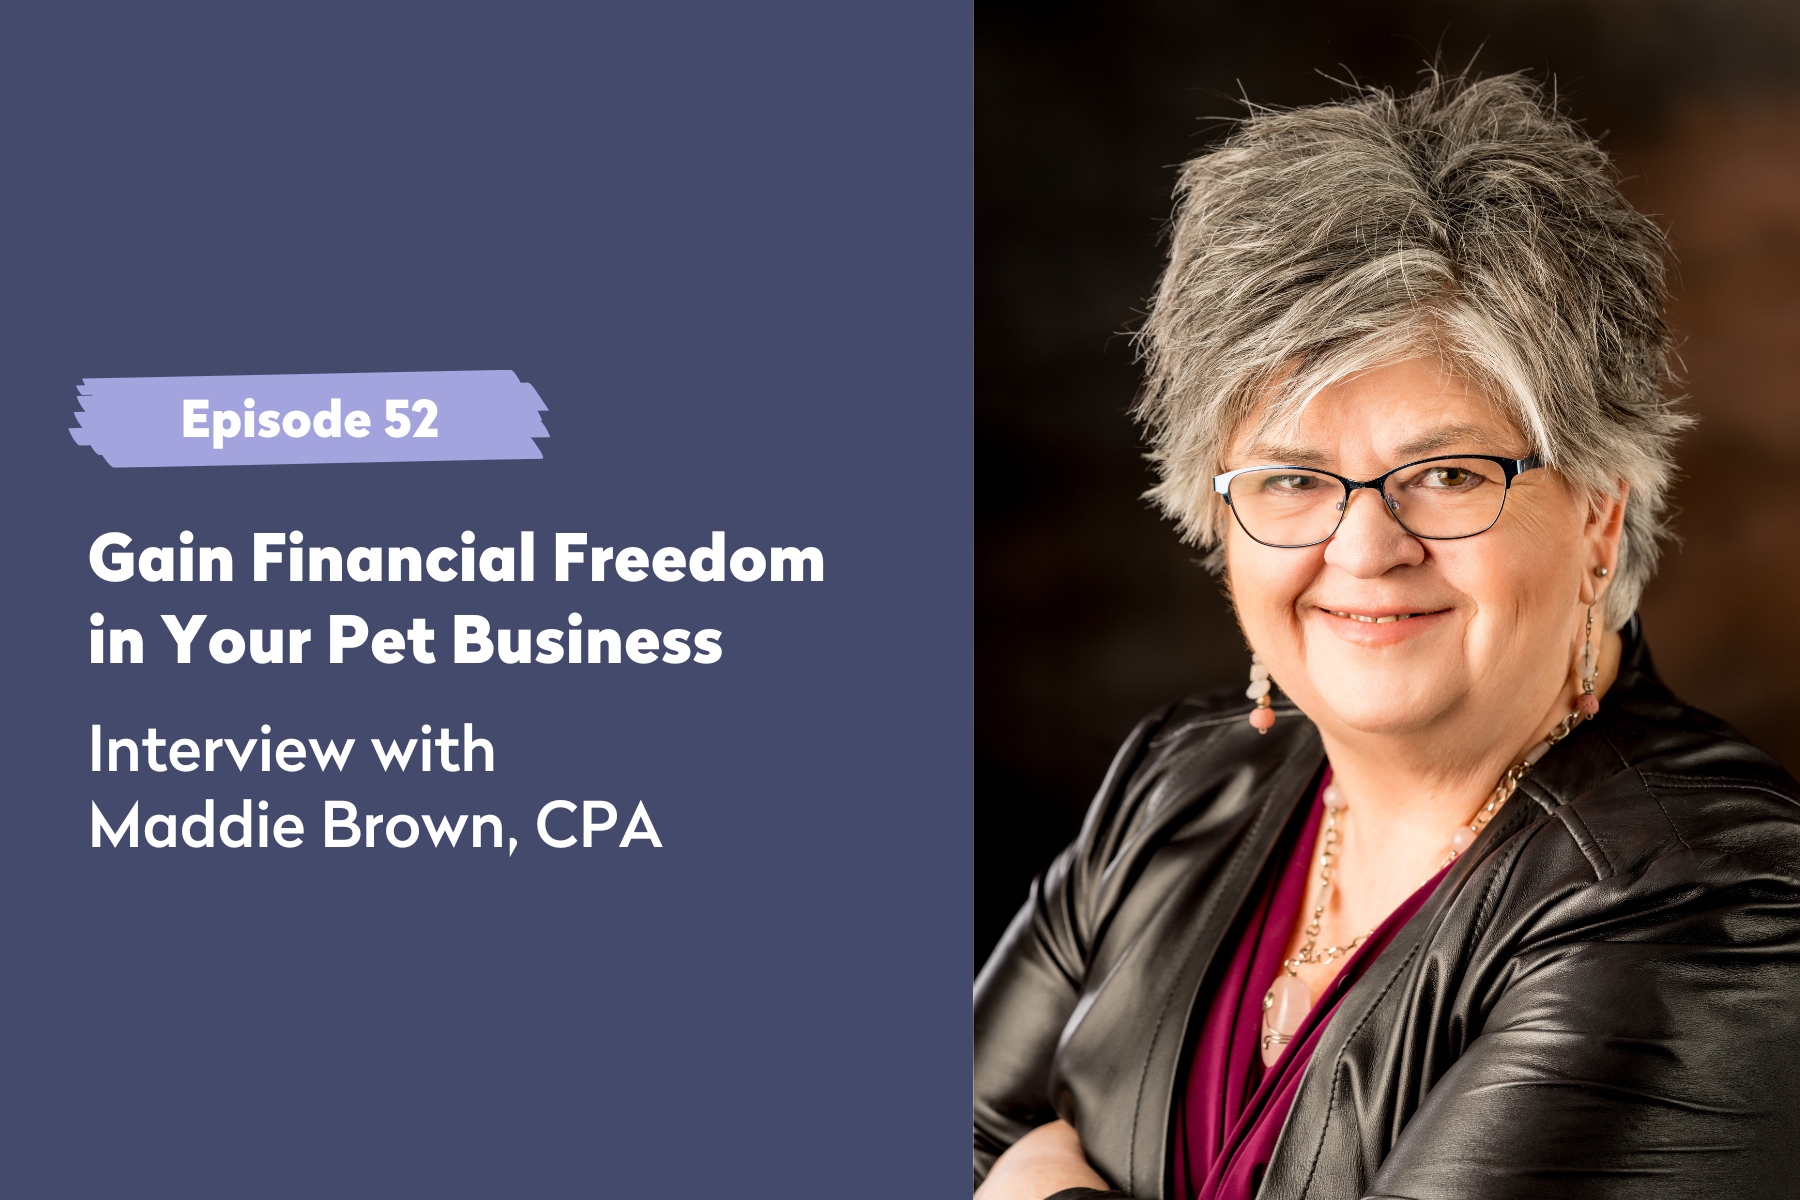 Episode 52 | Gain Financial Freedom in Your Pet Business: An Interview with Maddie Brown, CPA